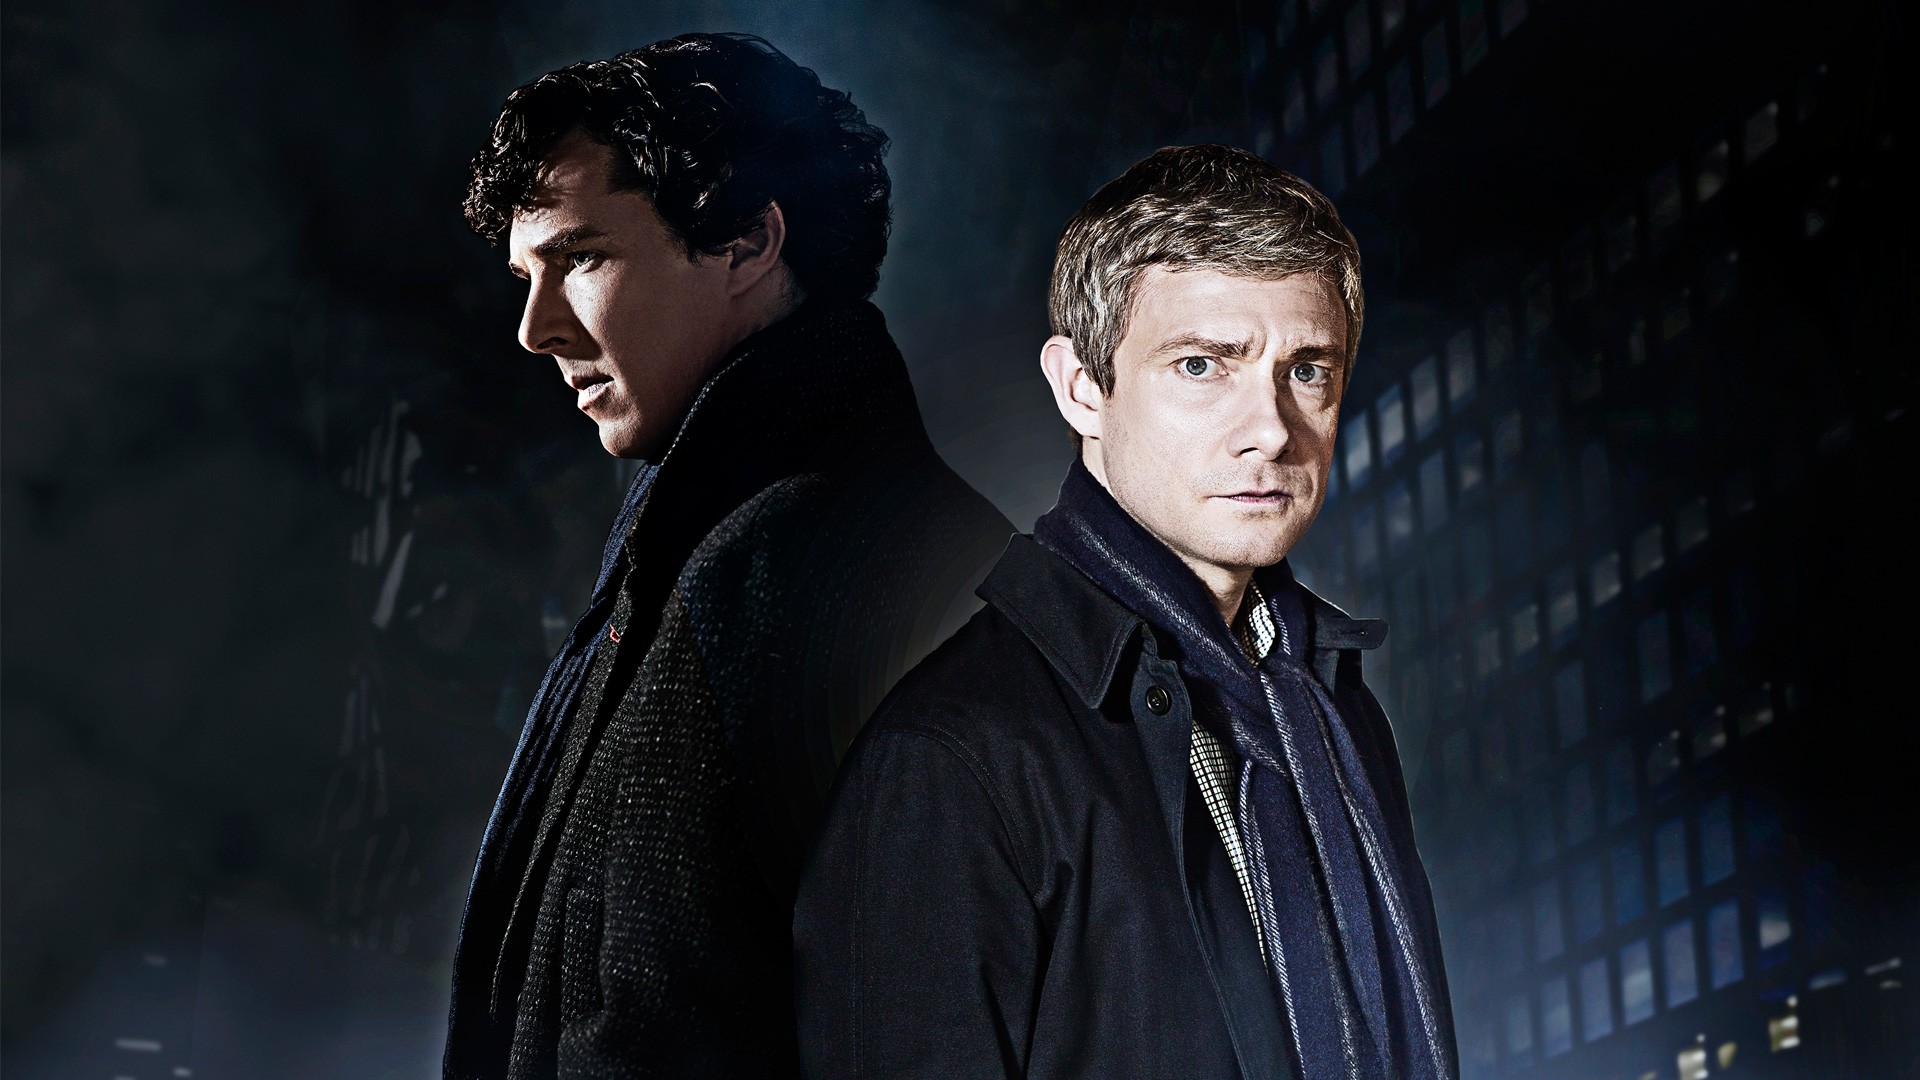 1920x1080 Keys: sherlock, wallpapers, wallpaper. Submitted Anonymously 4 years ago